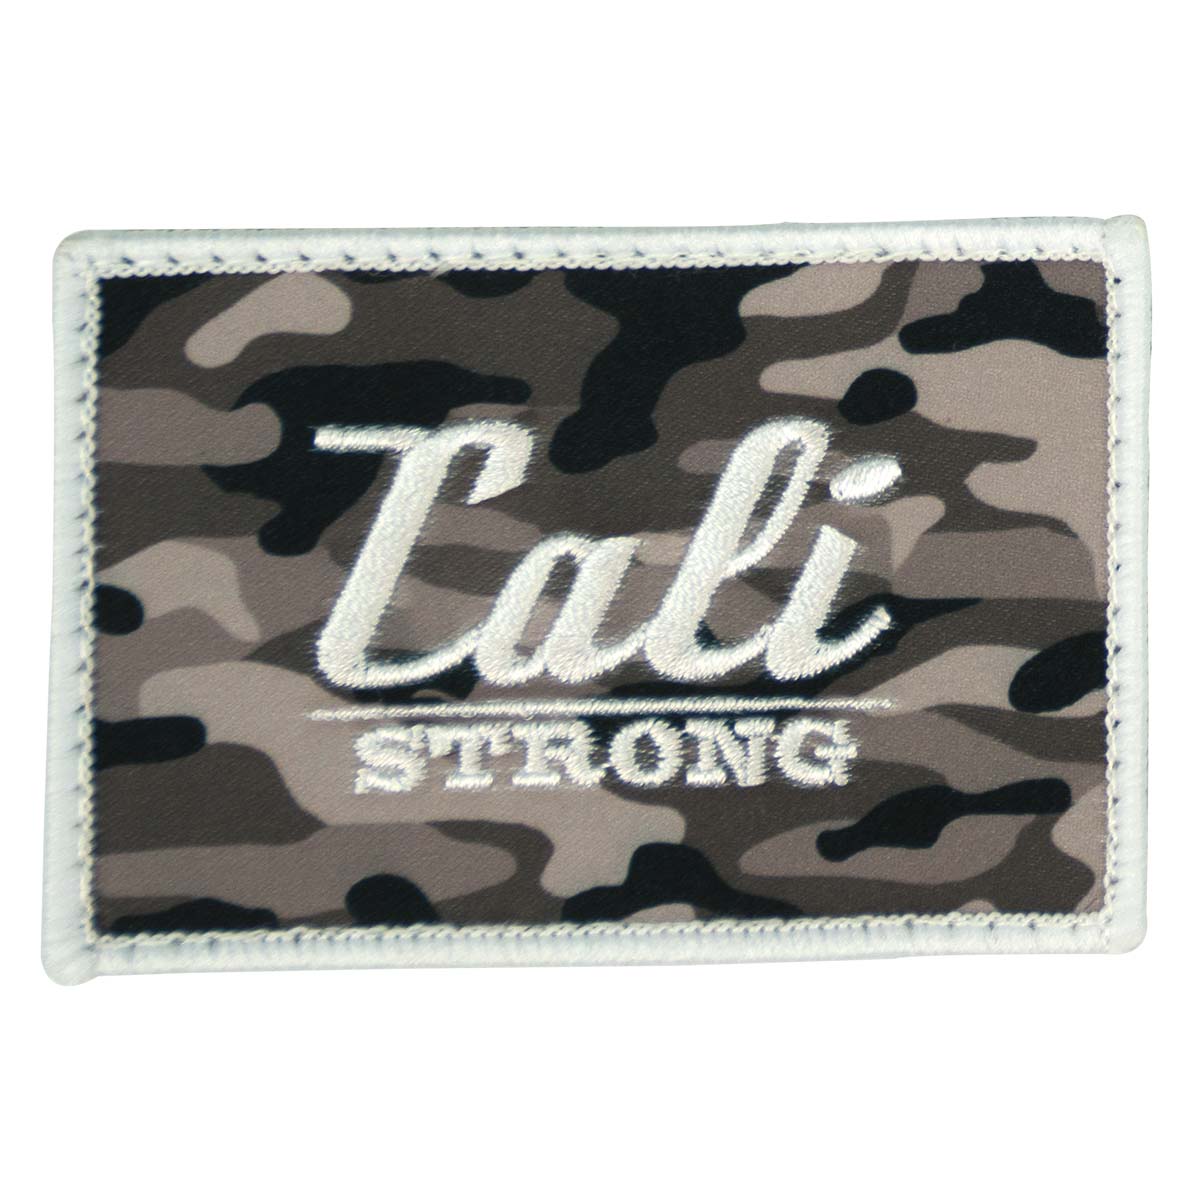 CALI Strong Urban Camo Grey Hook-and-Loop 2x3 2x3 Morale Patch - Patches - Image 1 - CALI Strong